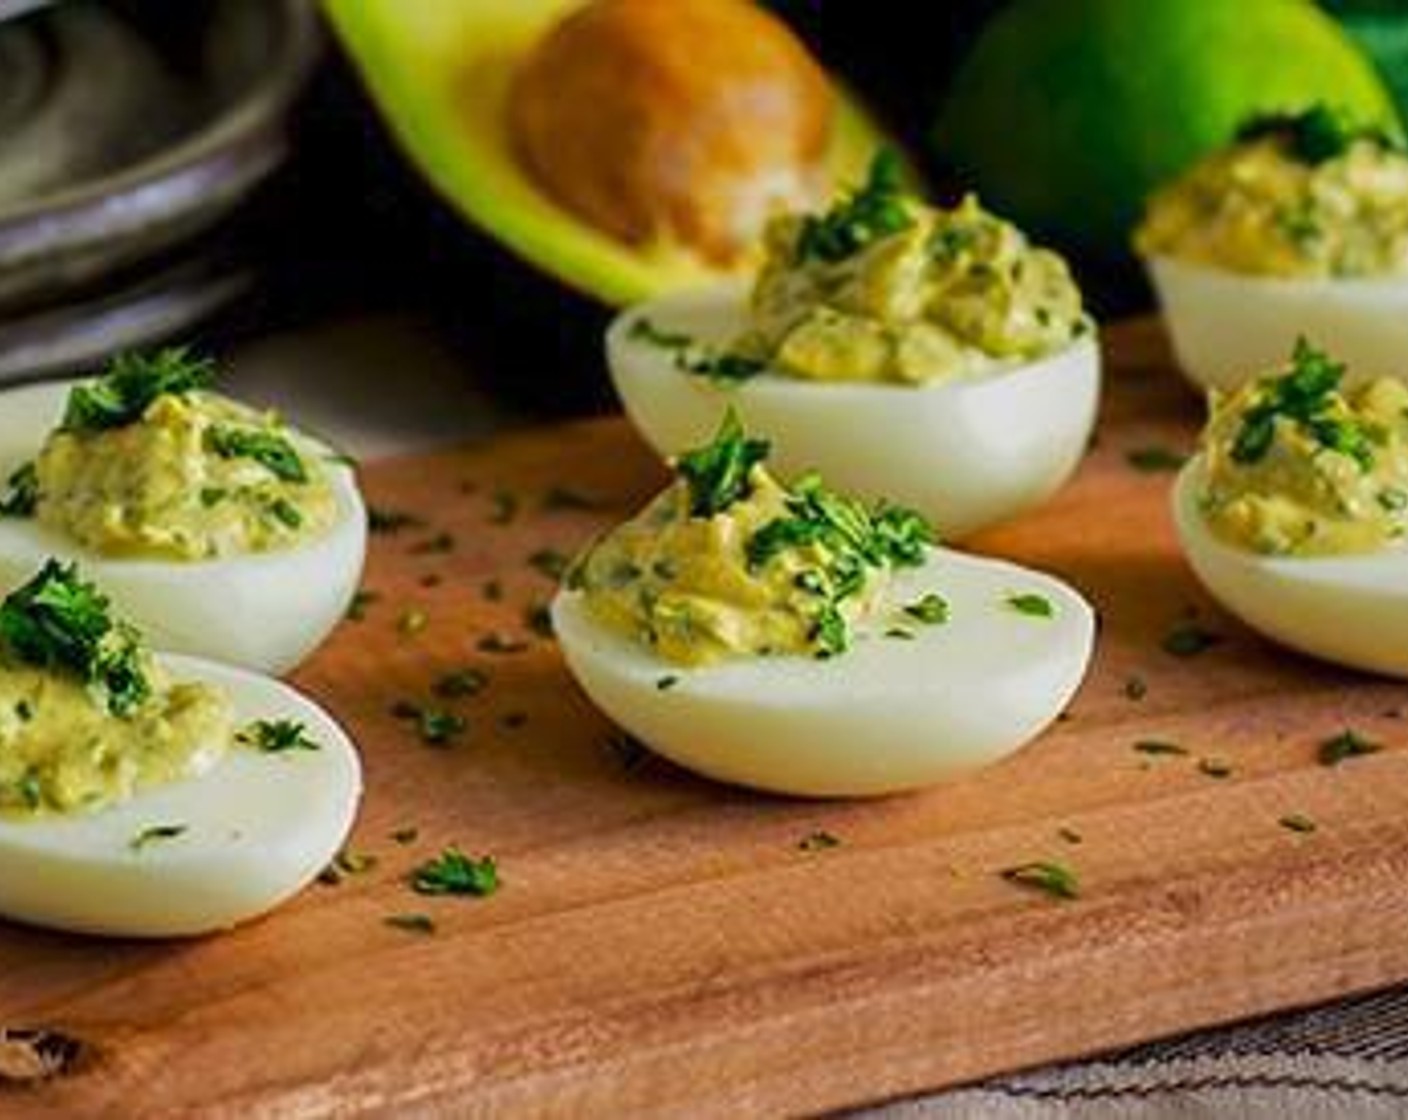 Yogurt and Avocado Deviled Eggs with Spices and Herbs